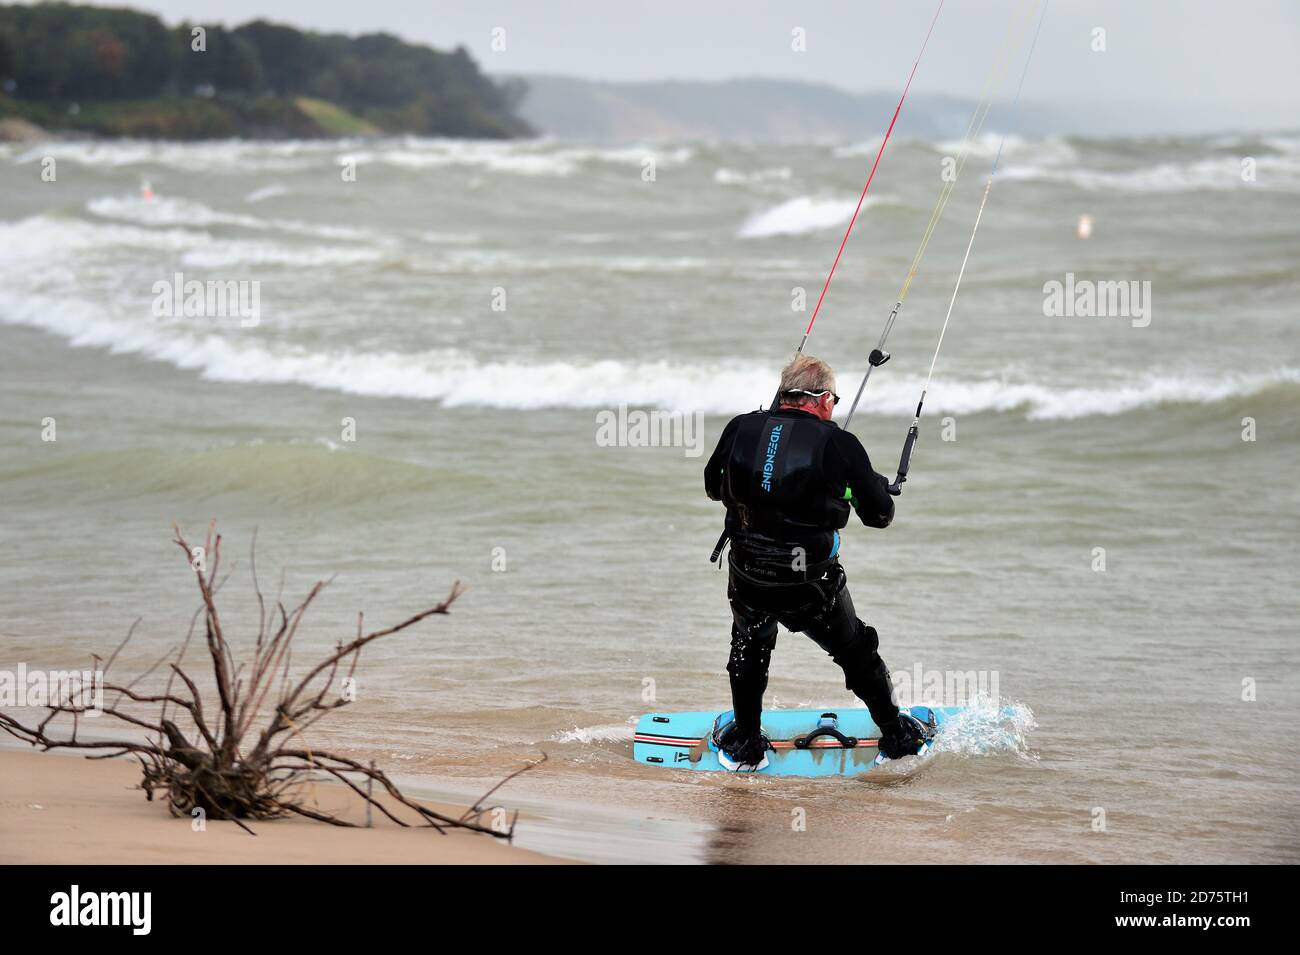 South Haven, Michigan, USA. A male parasailer along the South Haven beach working to have his parachute catch the wind and carry him into the lake. Stock Photo